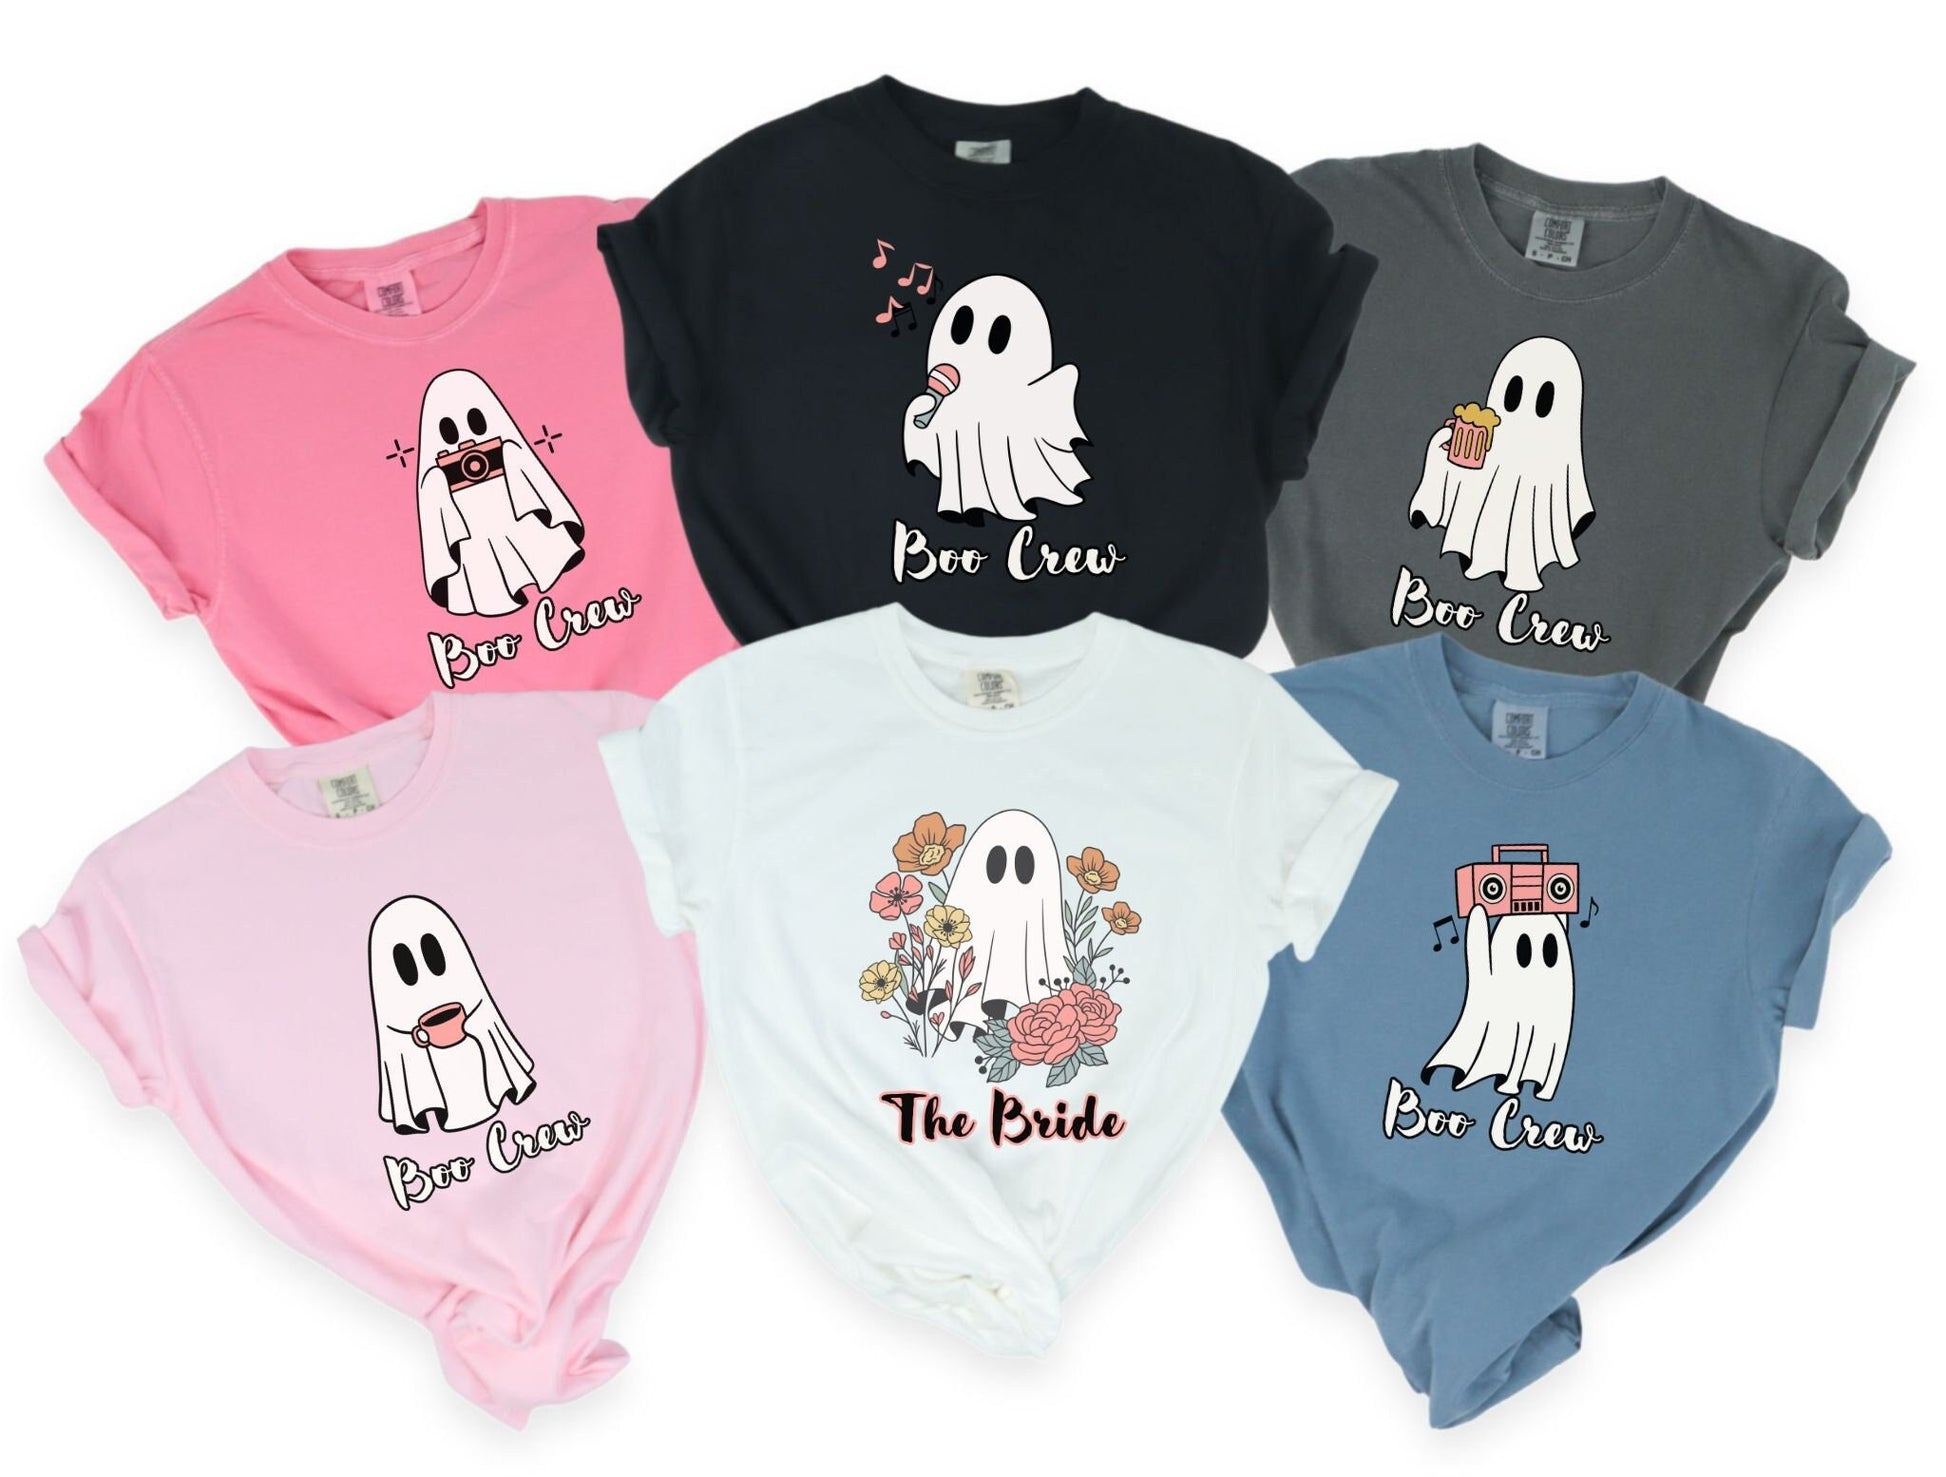 Multiple shirts in varying colors all with a woman wearing a cute crunchberry colored shirt with the text Boo Crew under a ghost figure holding a camera.